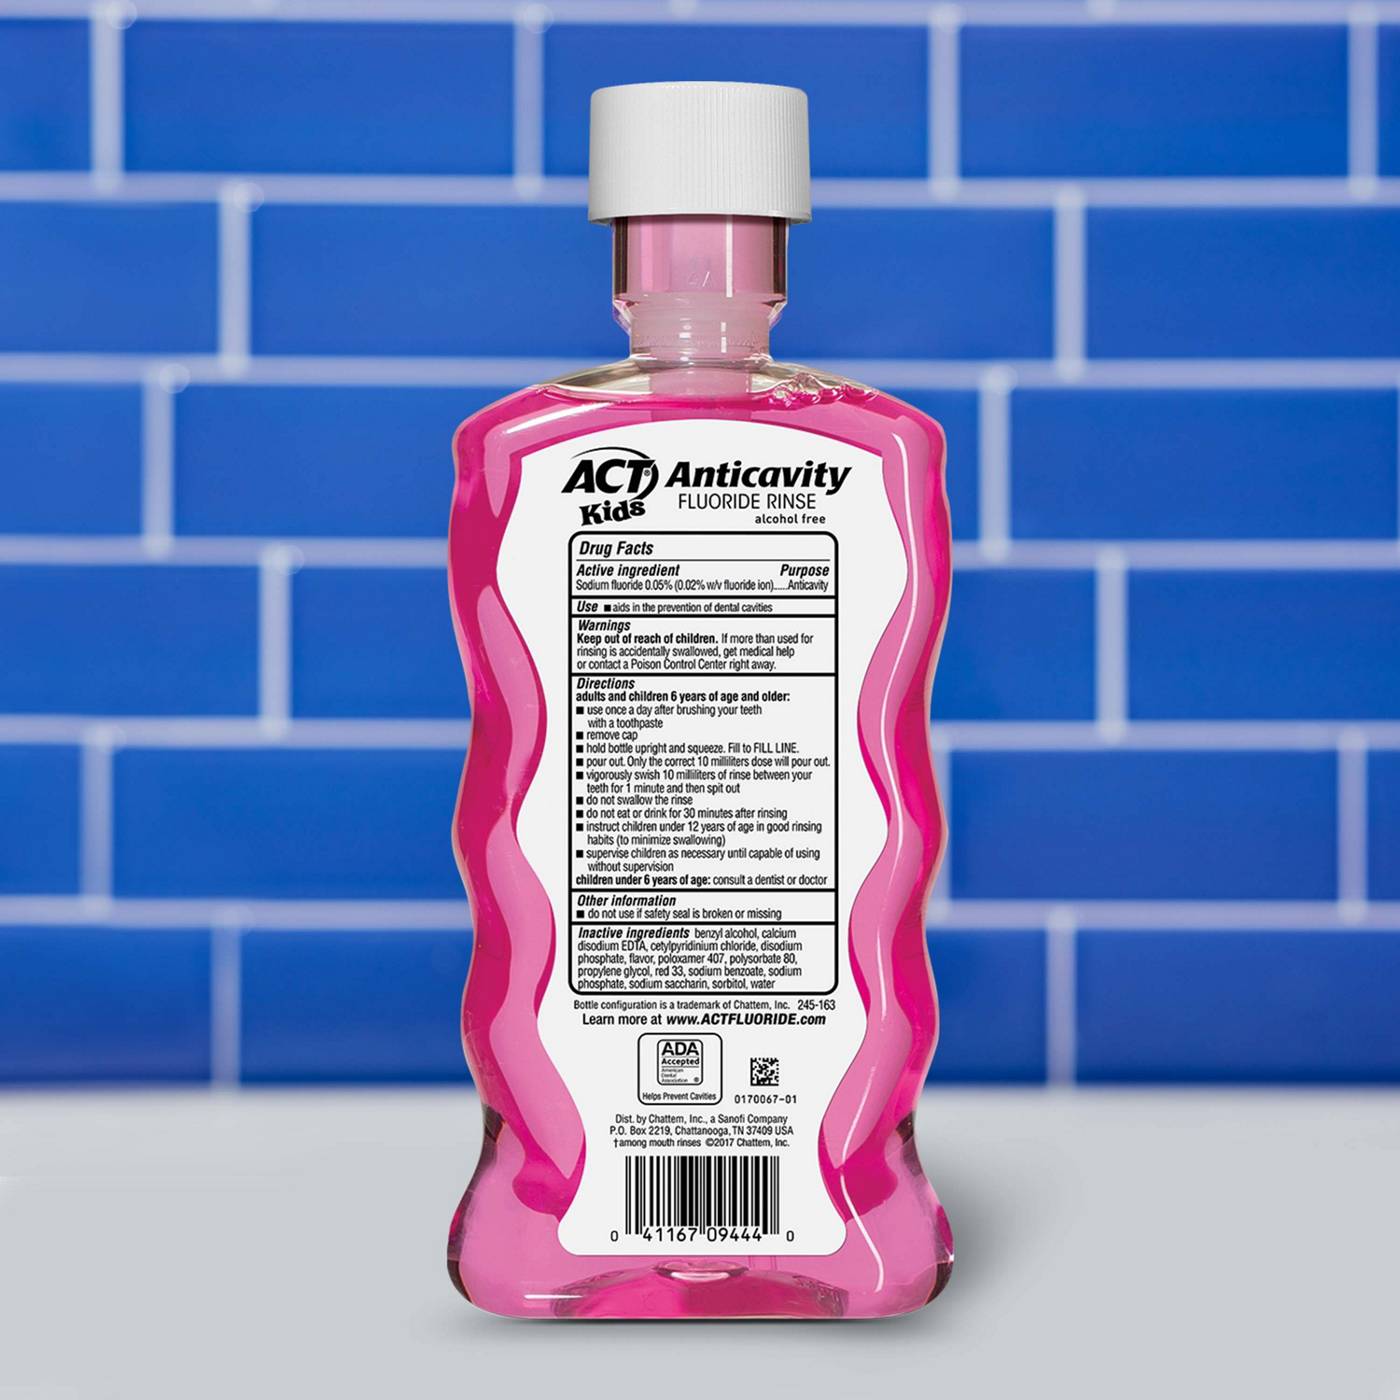 ACT Kids Anticavity Fluoride Rinse - Bubble Gum Blowout; image 4 of 6